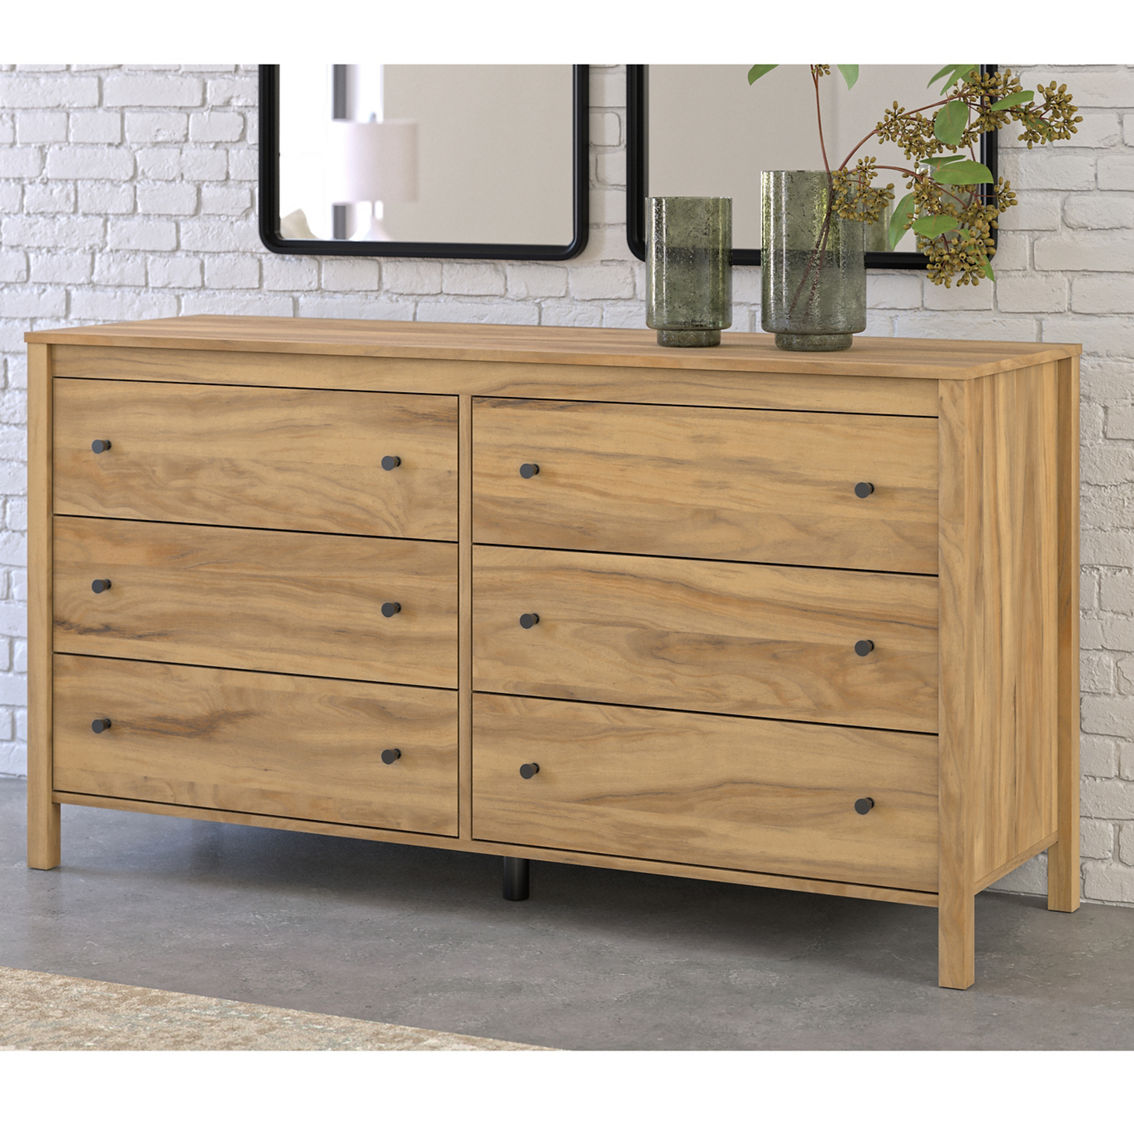 Signature Design by Ashley Bermacy Ready-To-Assemble Dresser - Image 5 of 7